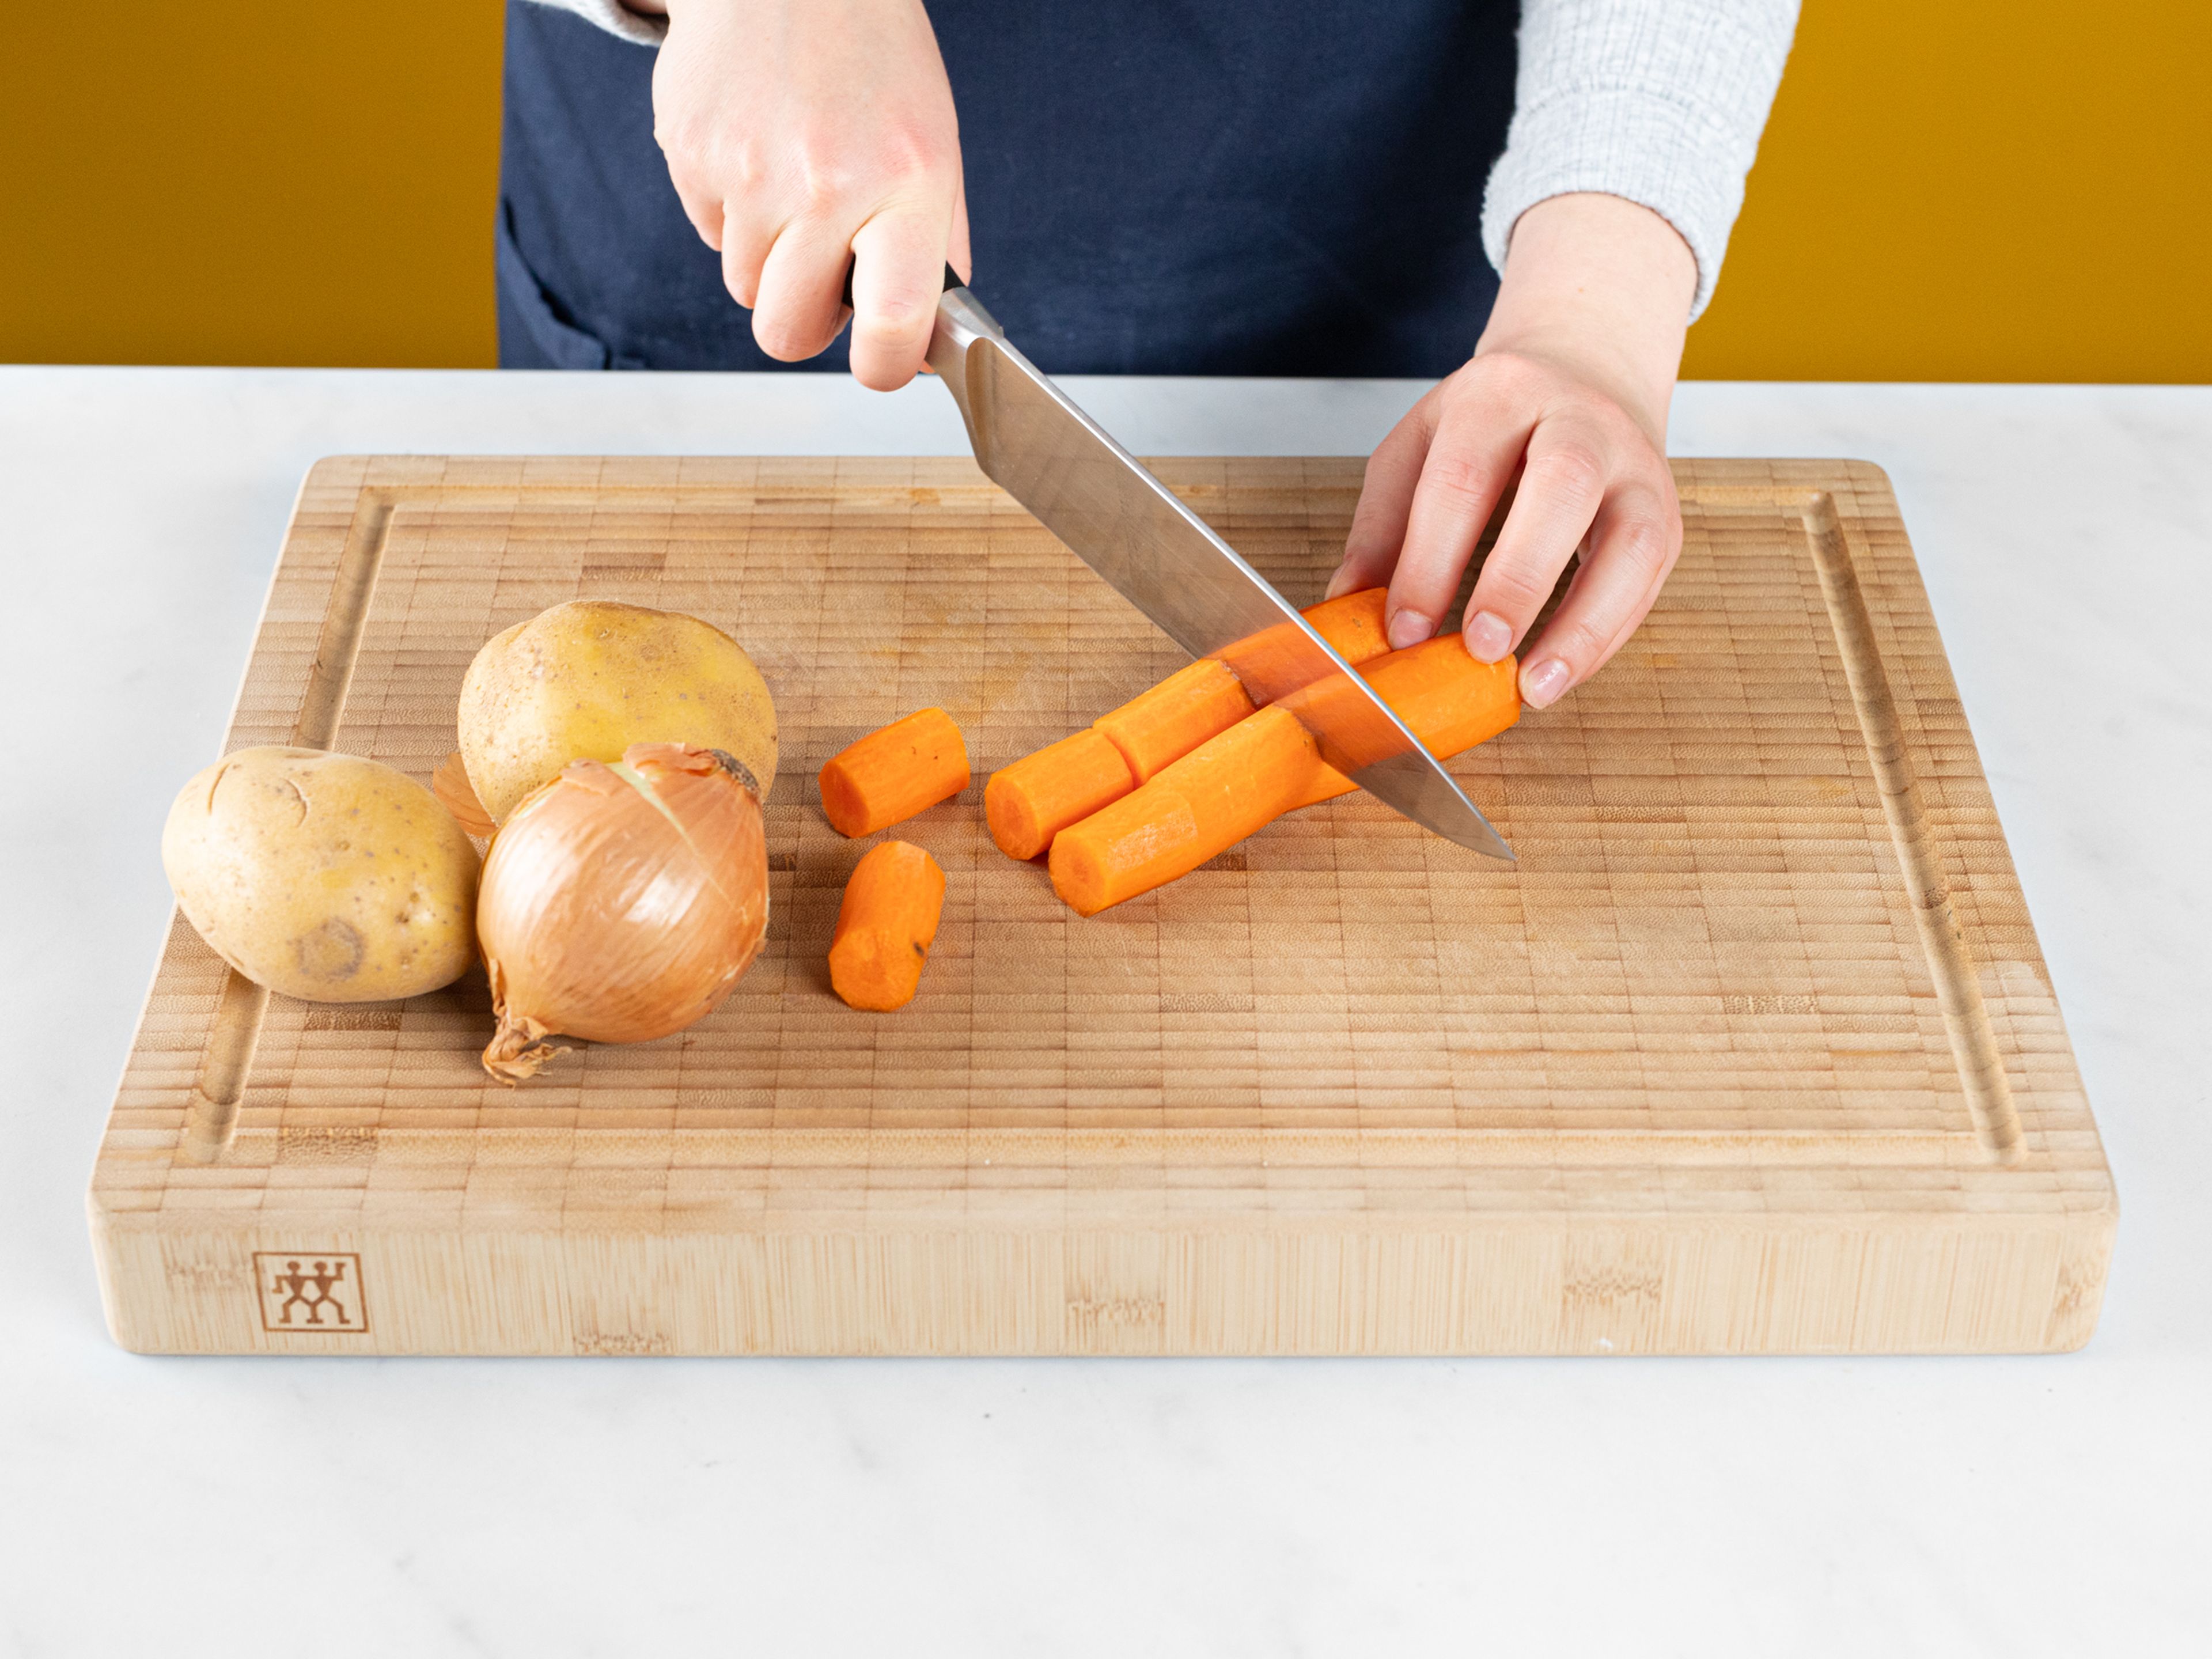 Peel and dice potatoes, carrots, and onion. Add them to a pot of cold water, season with salt, then bring to a boil. Reduce heat to medium and let simmer for approx. 15 - 20 min., or until the potatoes are fork-tender. Before draining, reserve 100 ml (0.5 cup) of the cooking water and set aside.